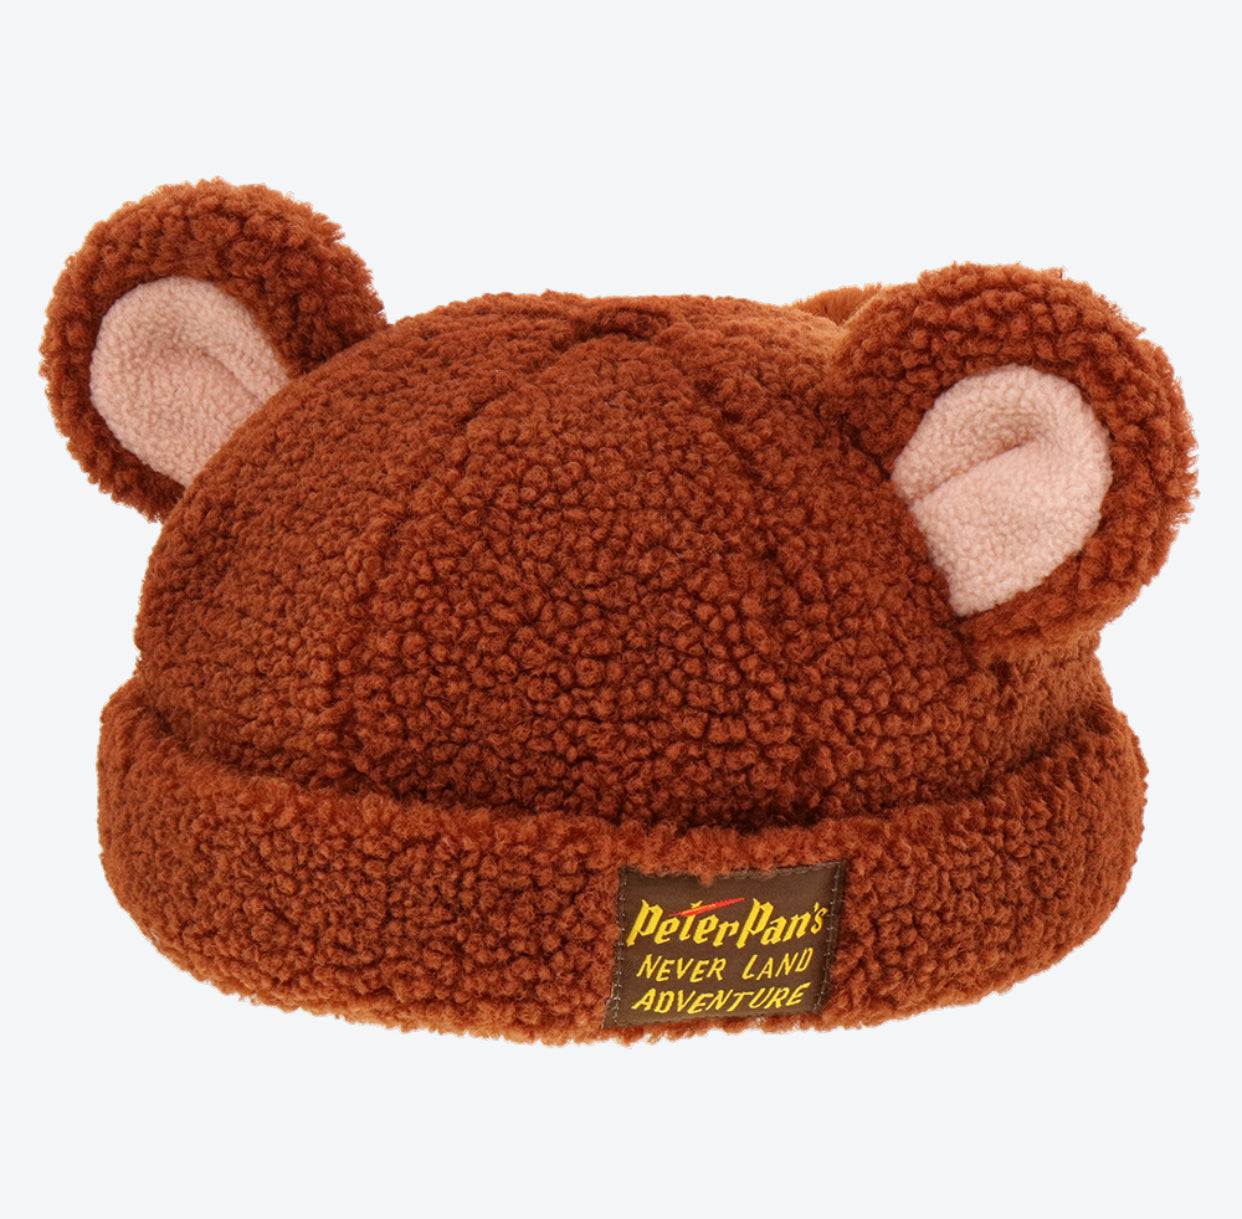 TDR - Fantasy Springs "Peter Pan Never Land Adventure" Collection x Lost Childen "Bear" Fluffy Hat with Ears (It may takes up to 6-8 weeks for us to mail it out)